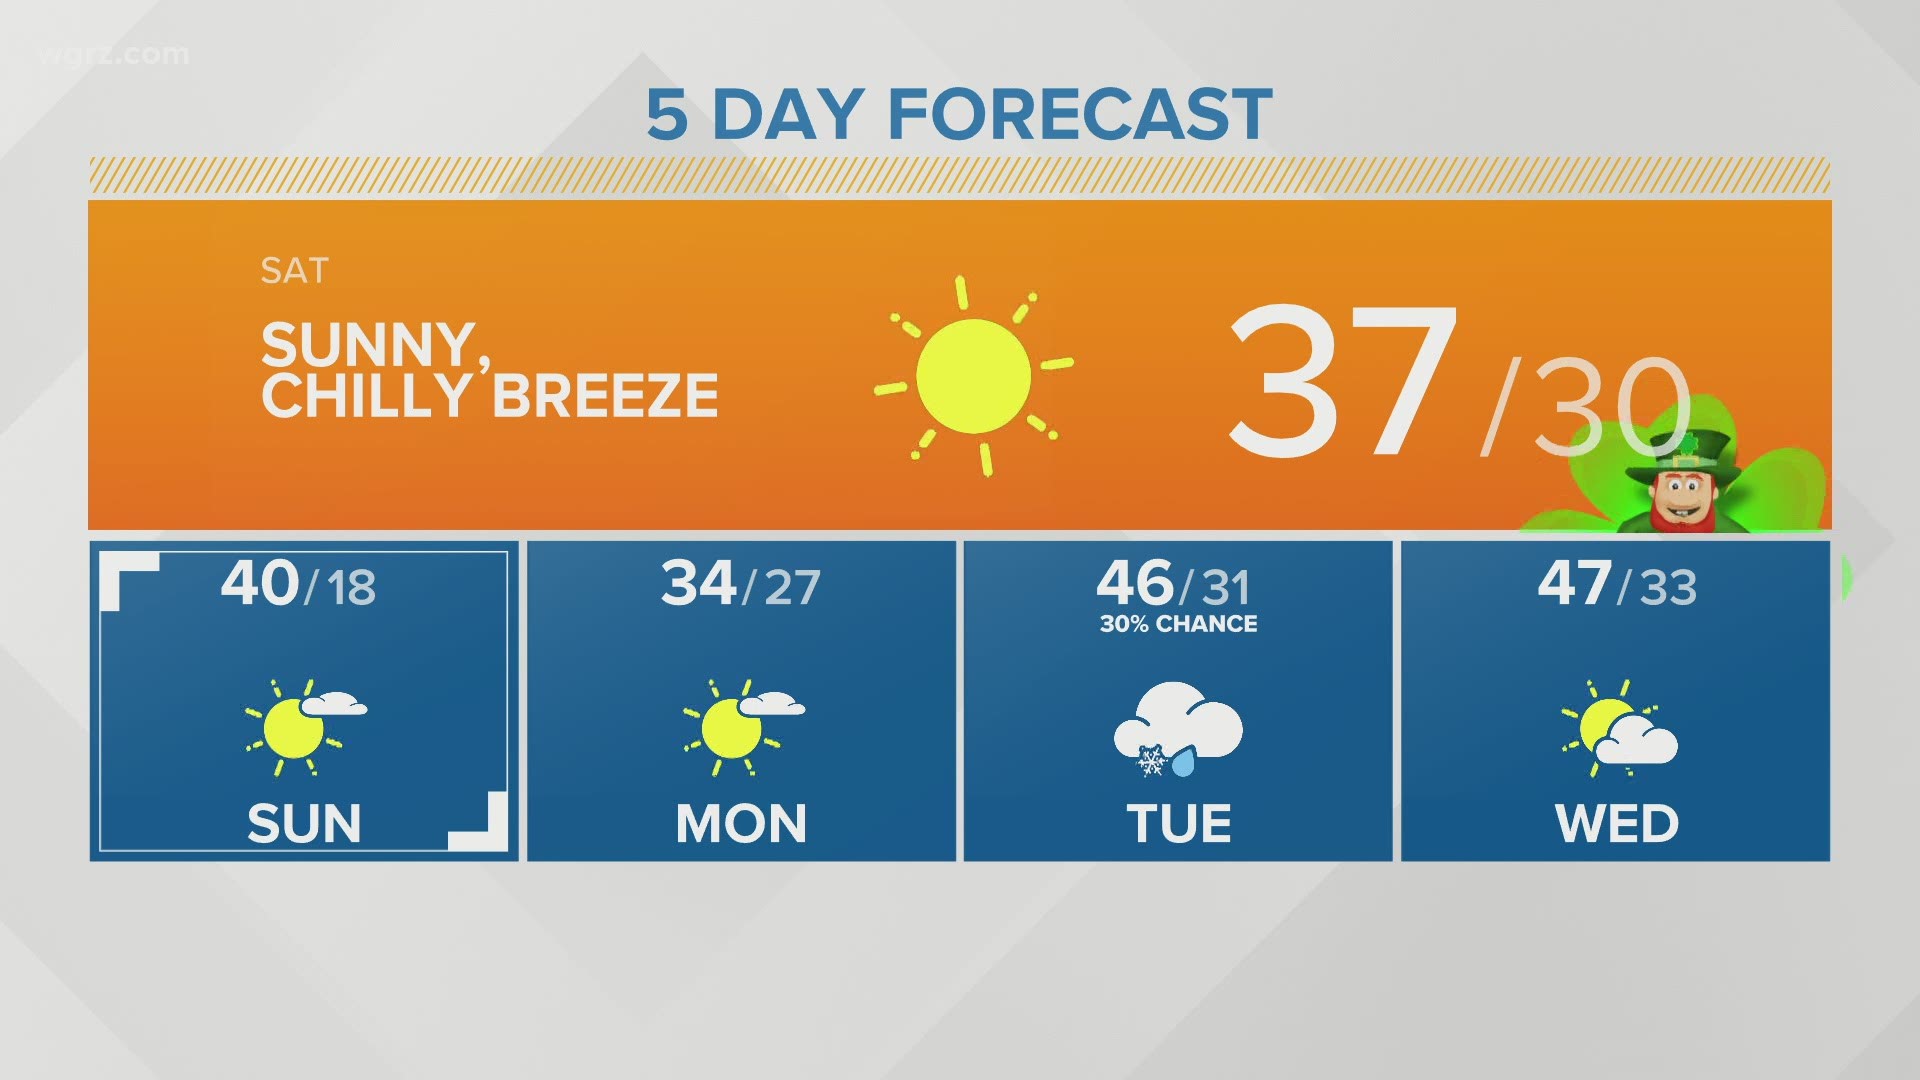 Saturday will be sunny, with a high in the mid 30s.